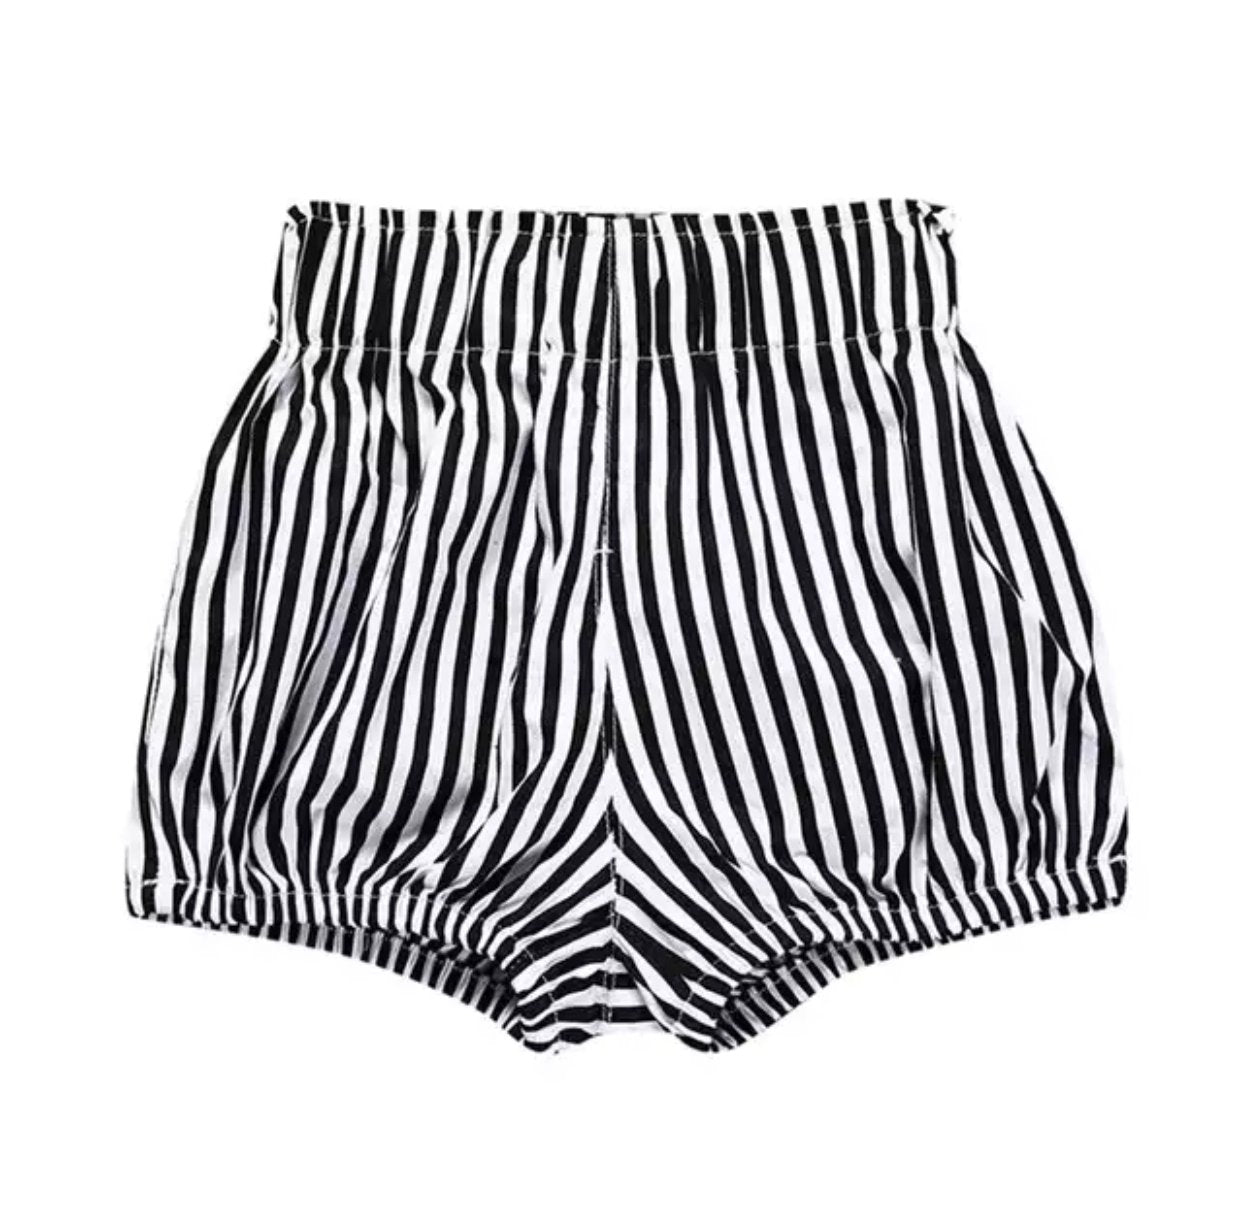 Girl's Black and White Striped Bubble Shorts - Squishy Cheeks